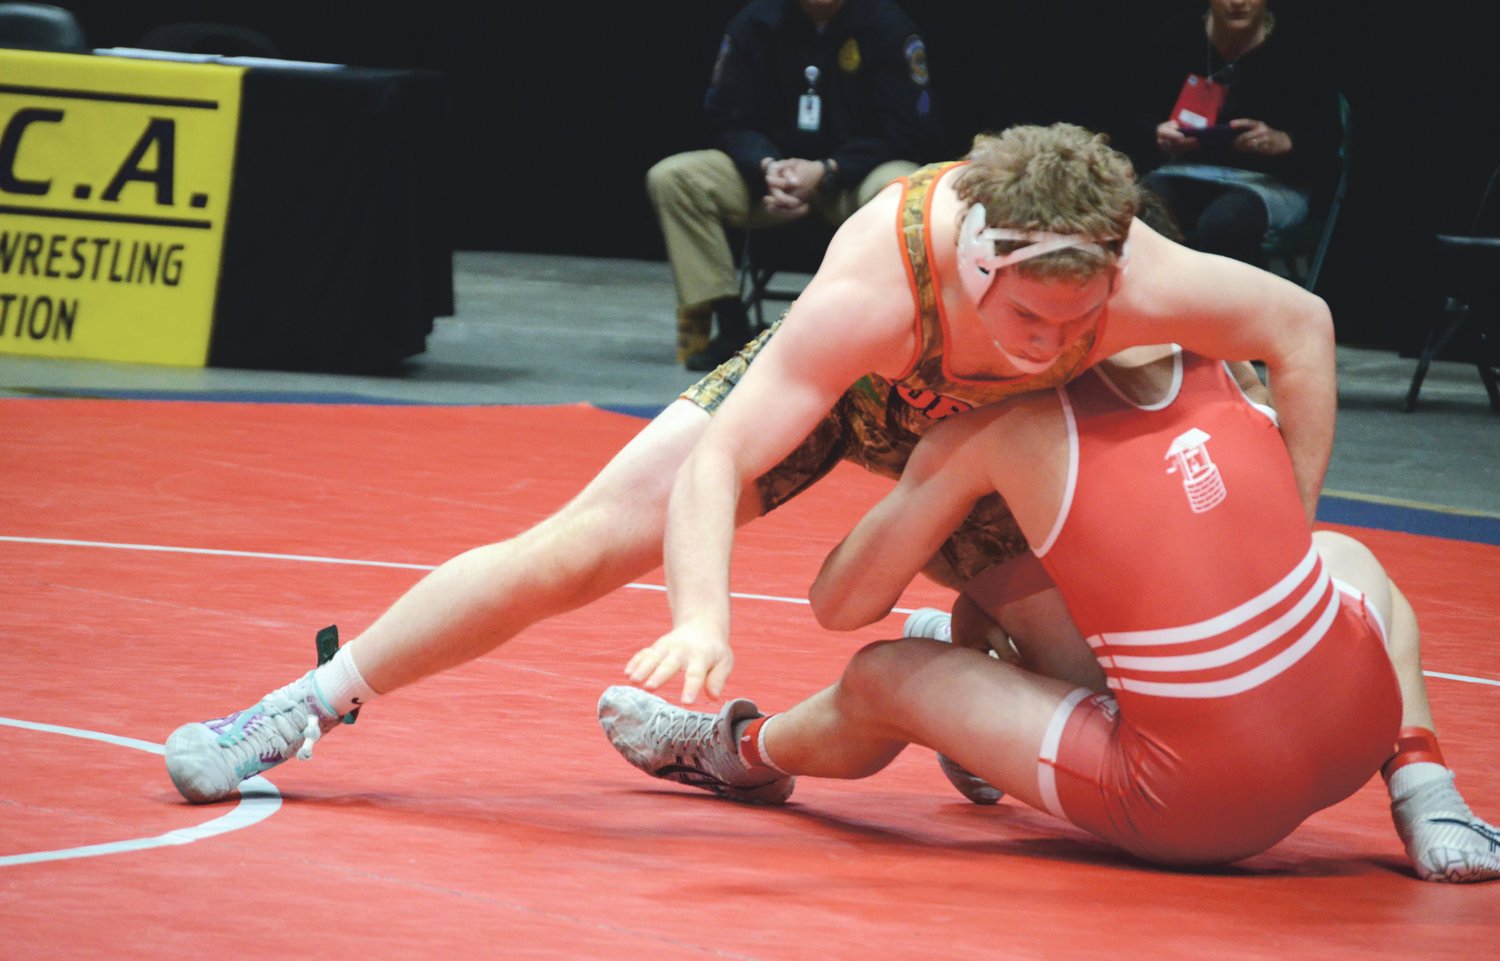 Drew Webster pinned Martinsville's Micah Dodson in the state quarterfinals.